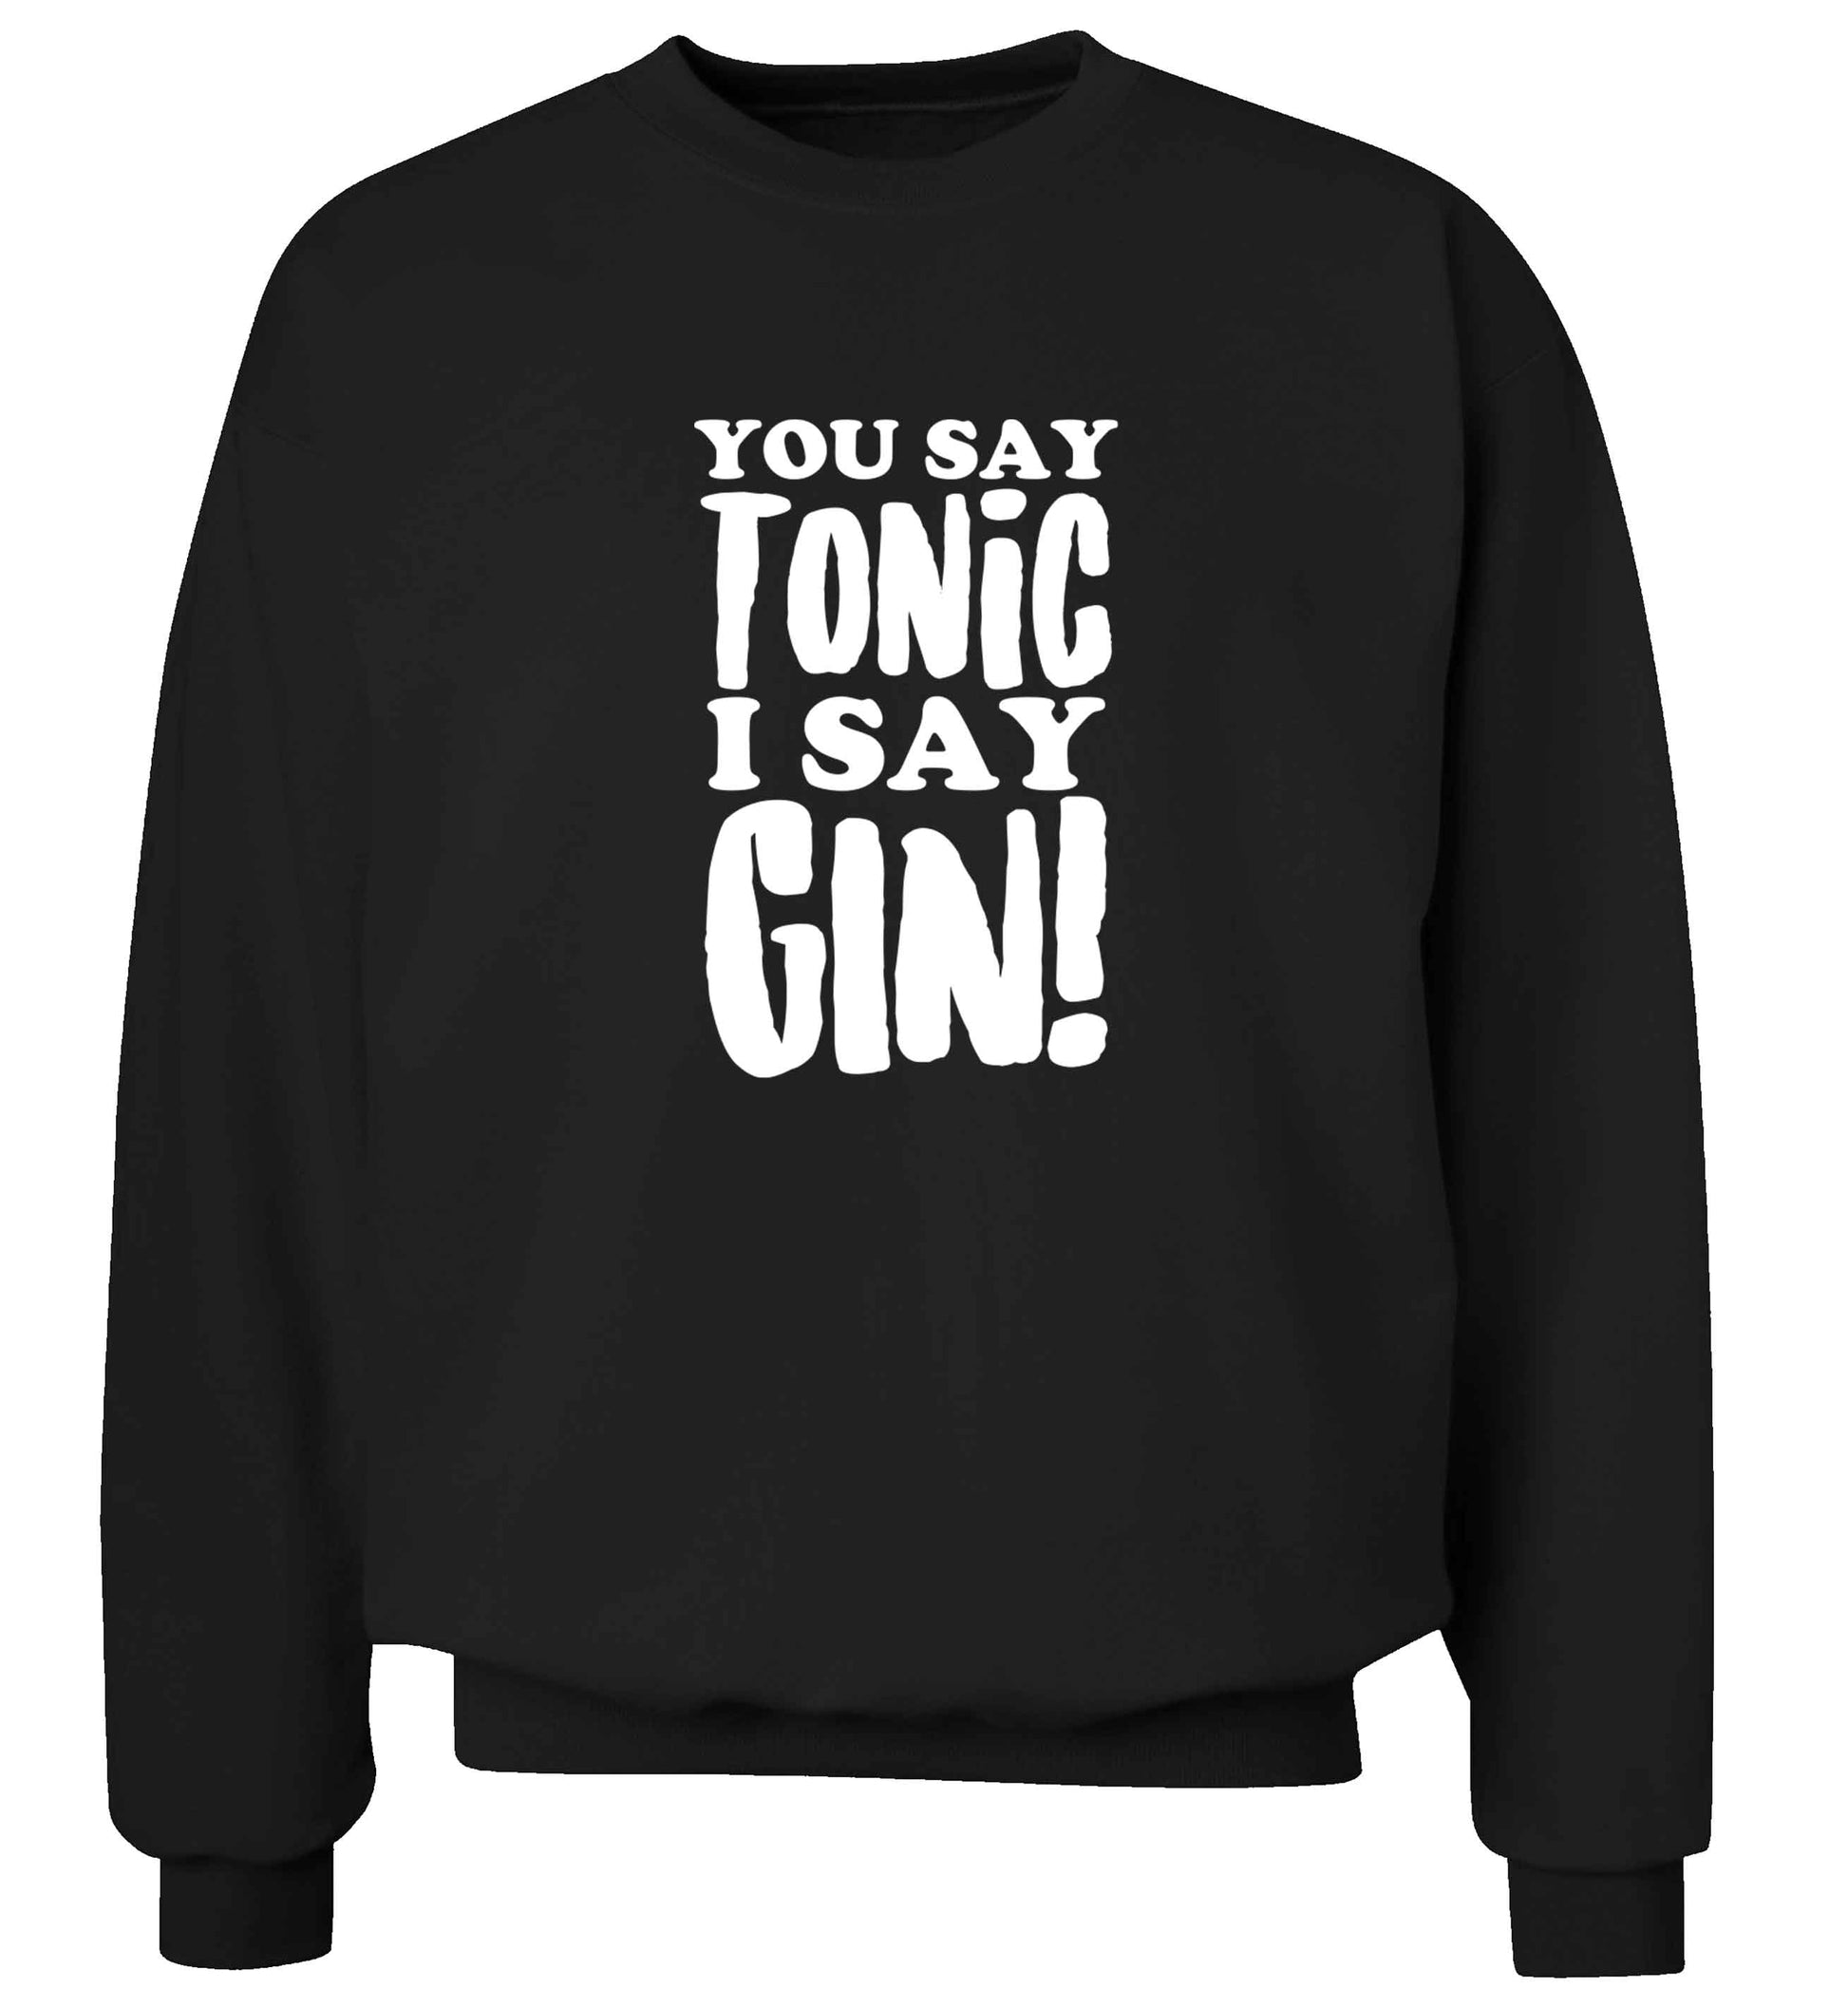 You say tonic I say gin adult's unisex black sweater 2XL